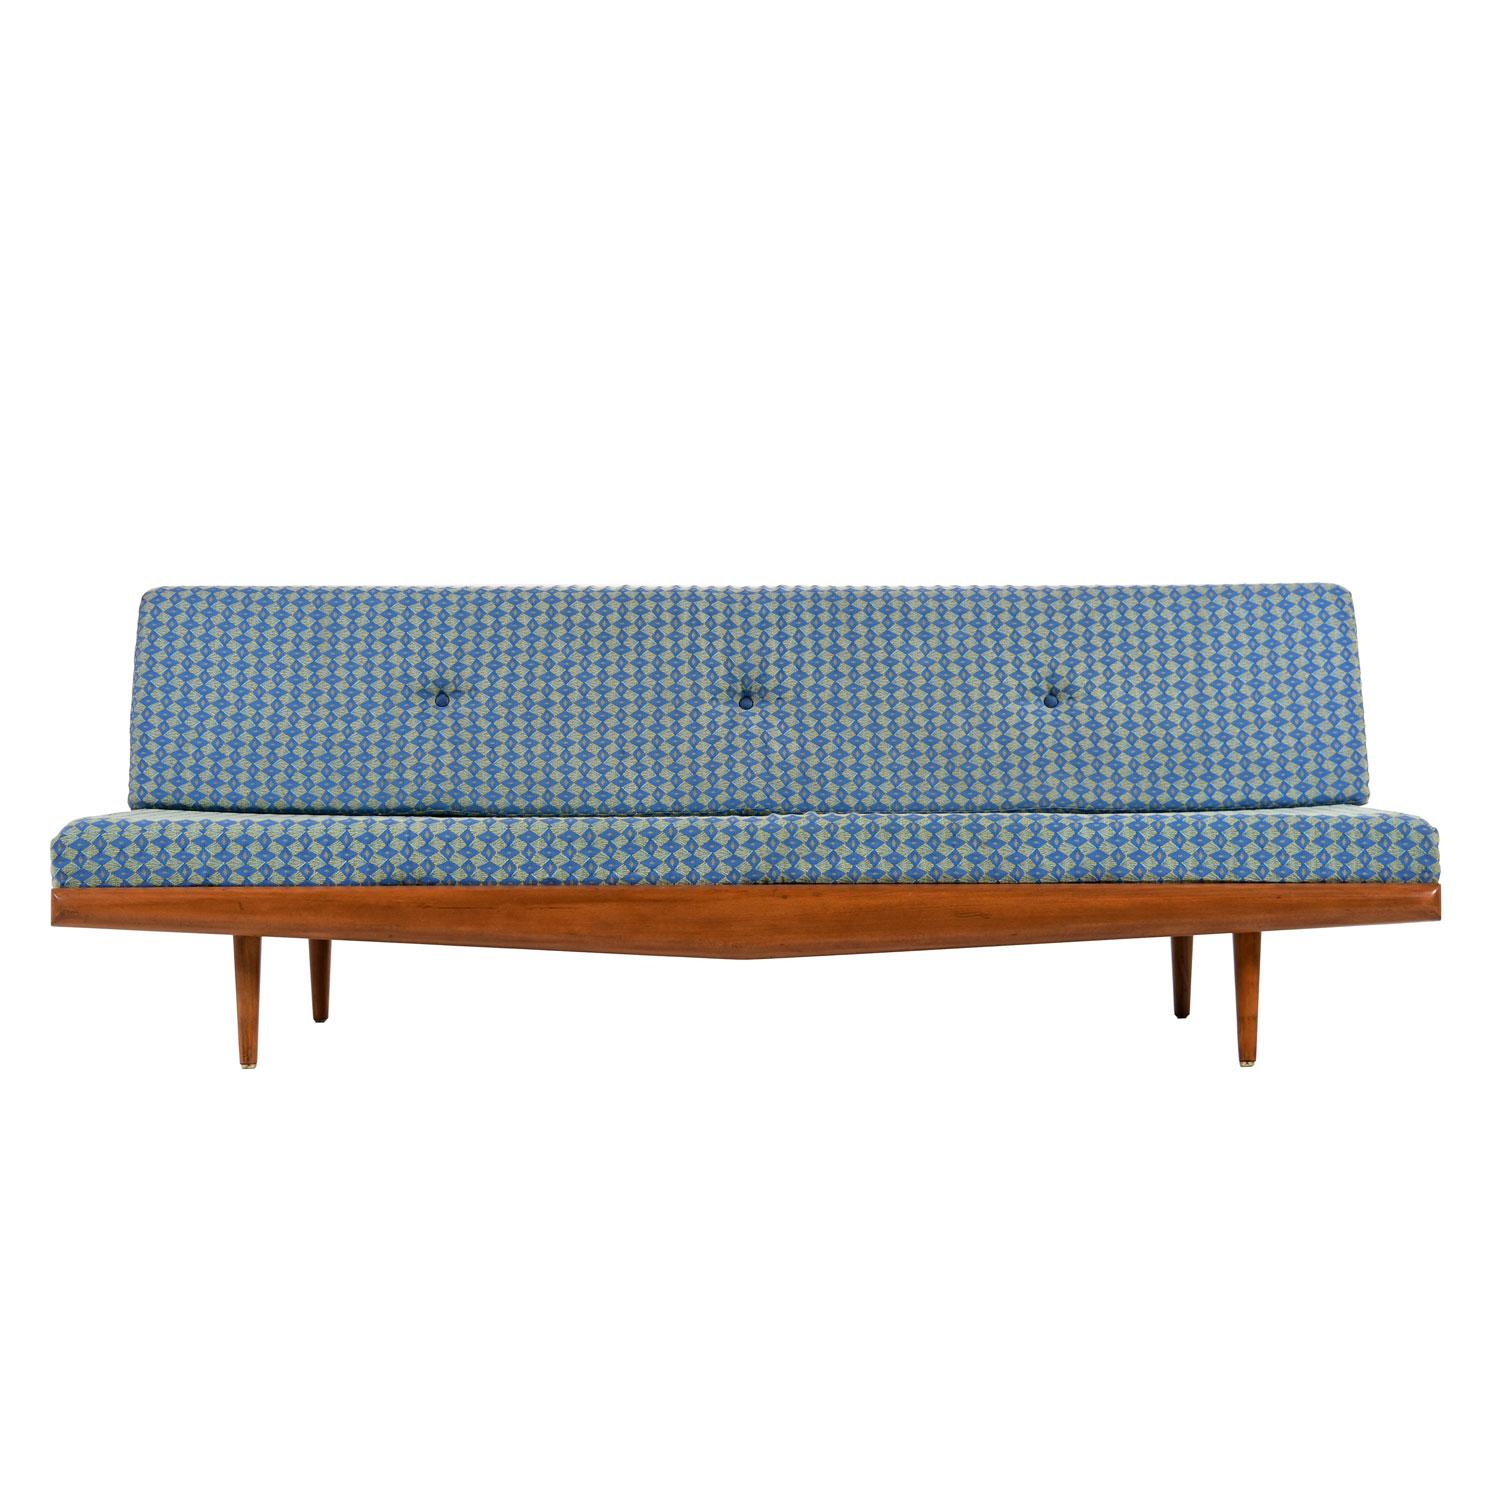 Beautifully restored Mid-Century Modern daybed sofa couch in the style of Adrian Pearsall. We have (2) identical sofas available and sold separately. This sofa appears to be soaring like a falcon. The solid beech wood frame and support backs are in